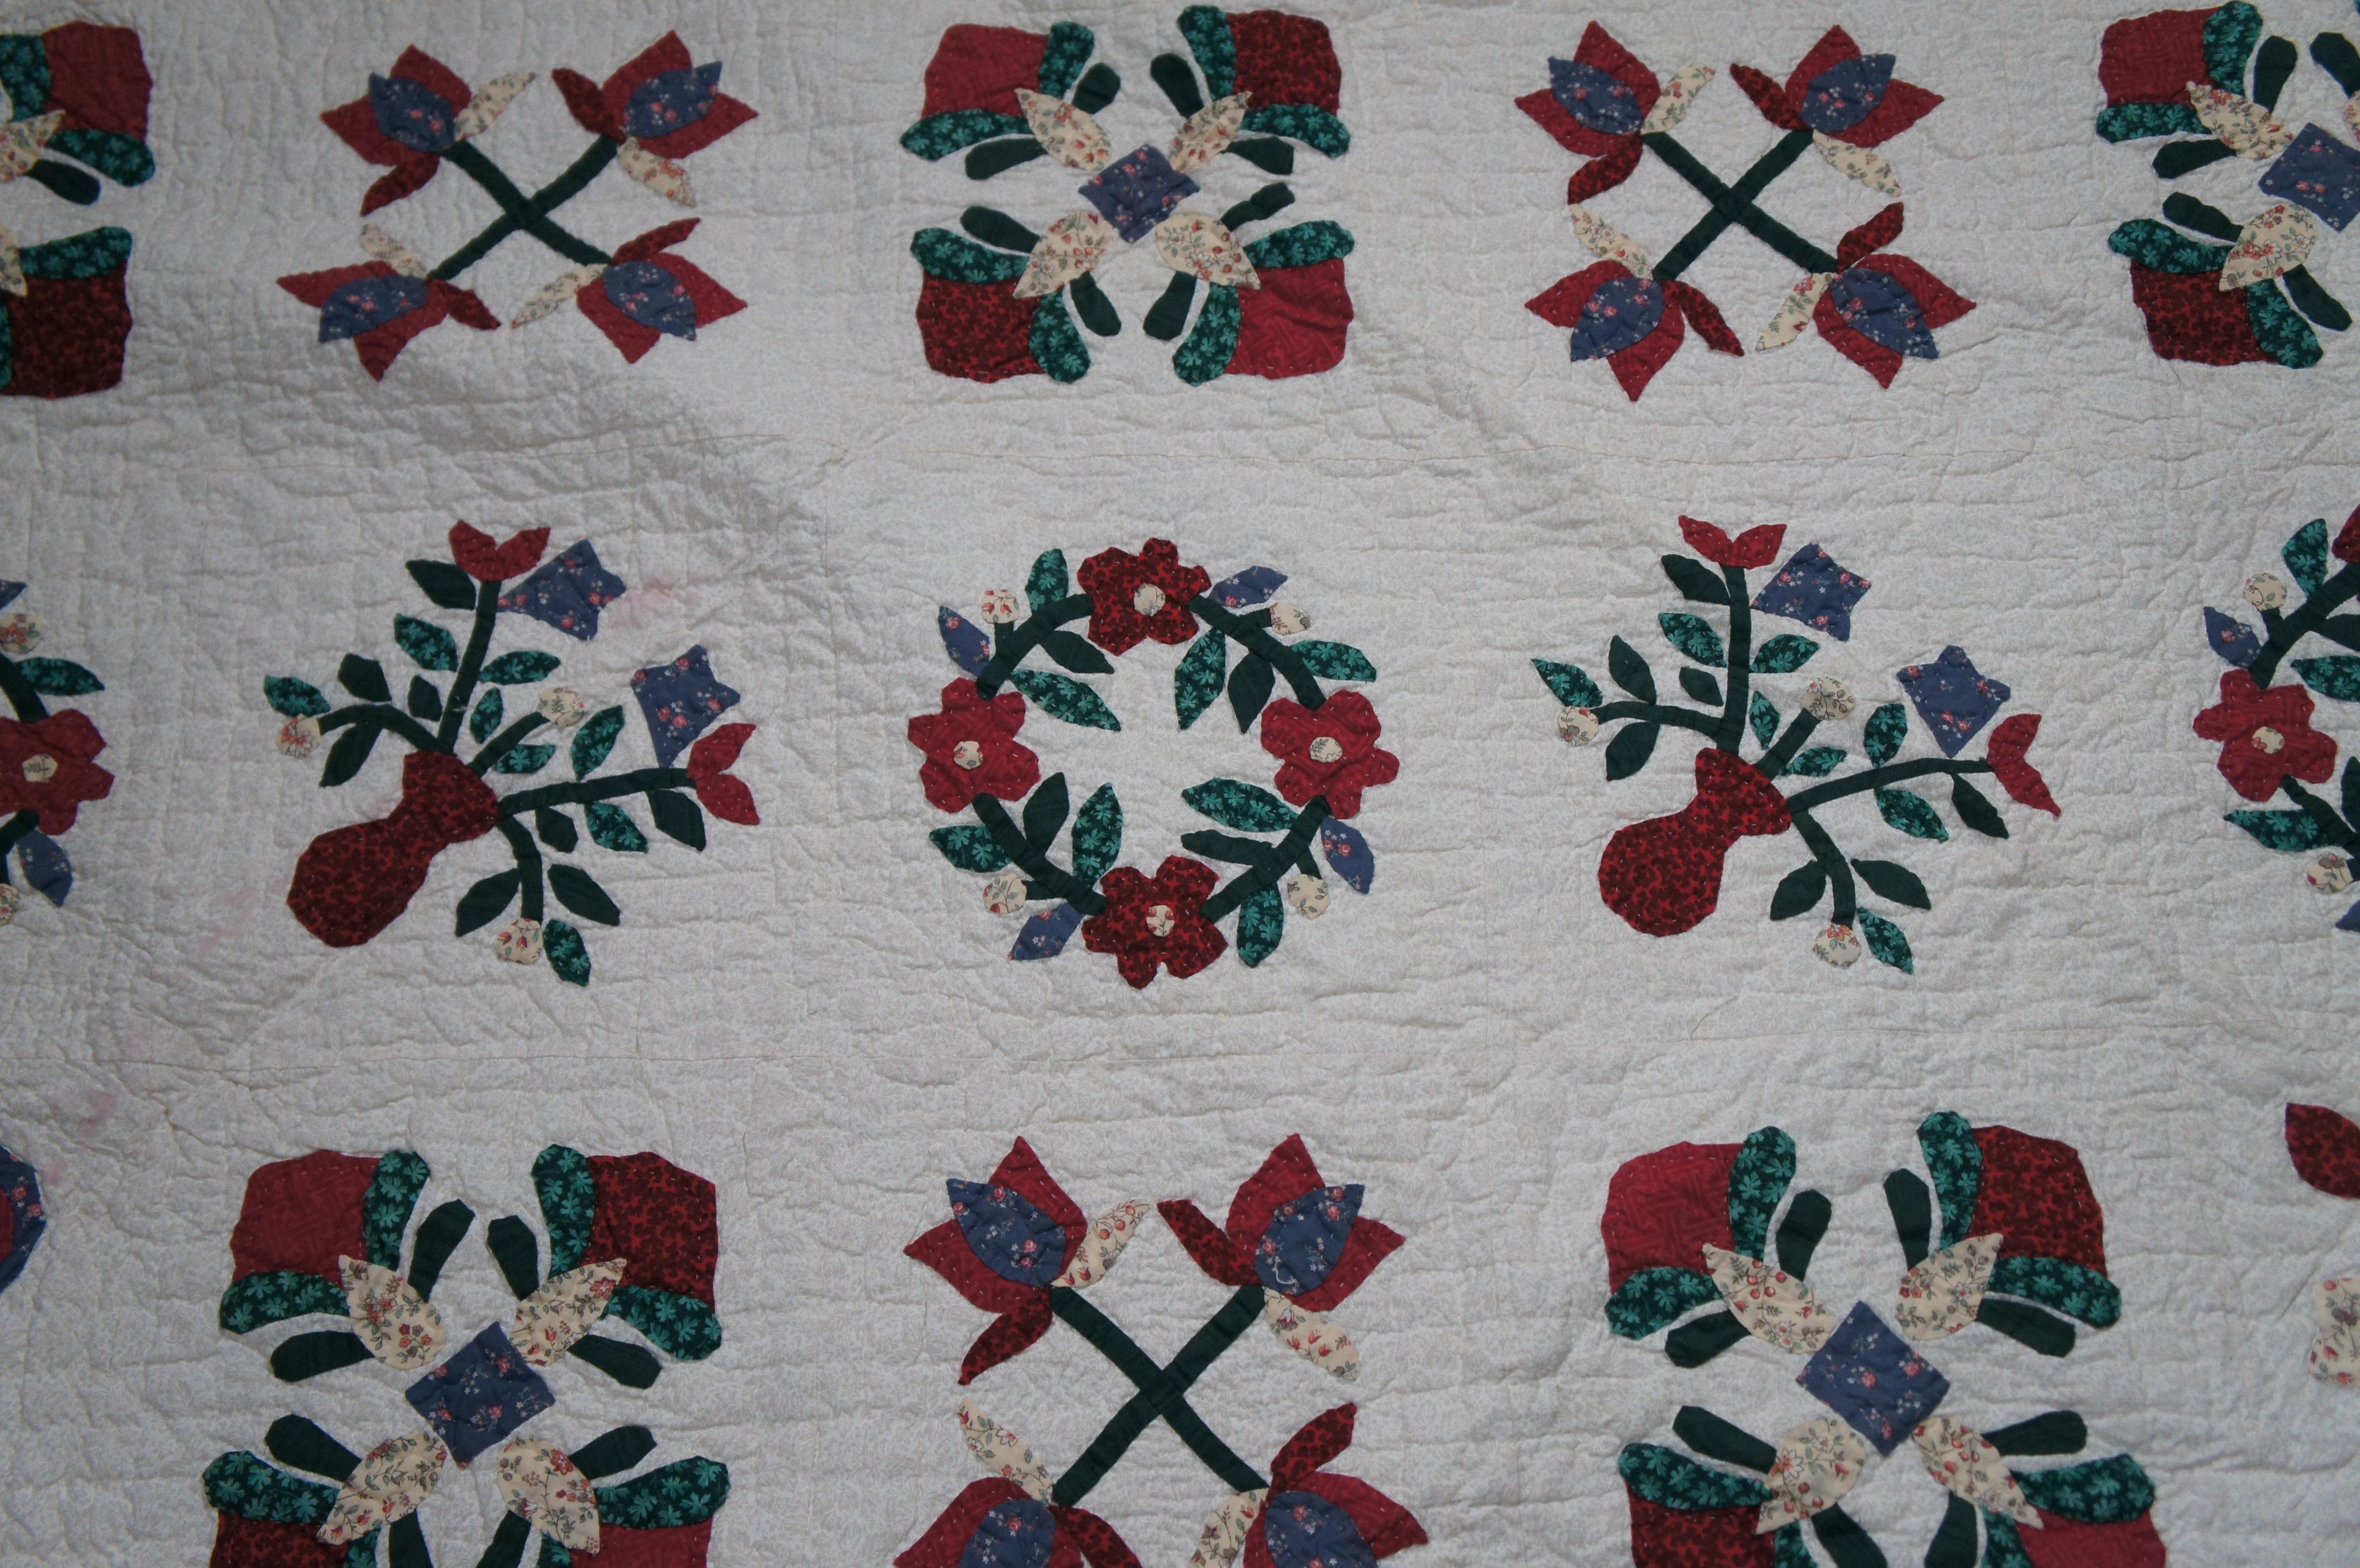 Vintage Hand Sewn Red & Green Floral Quilt Full Size Bedspread Applique Patchwrk In Good Condition For Sale In Dayton, OH